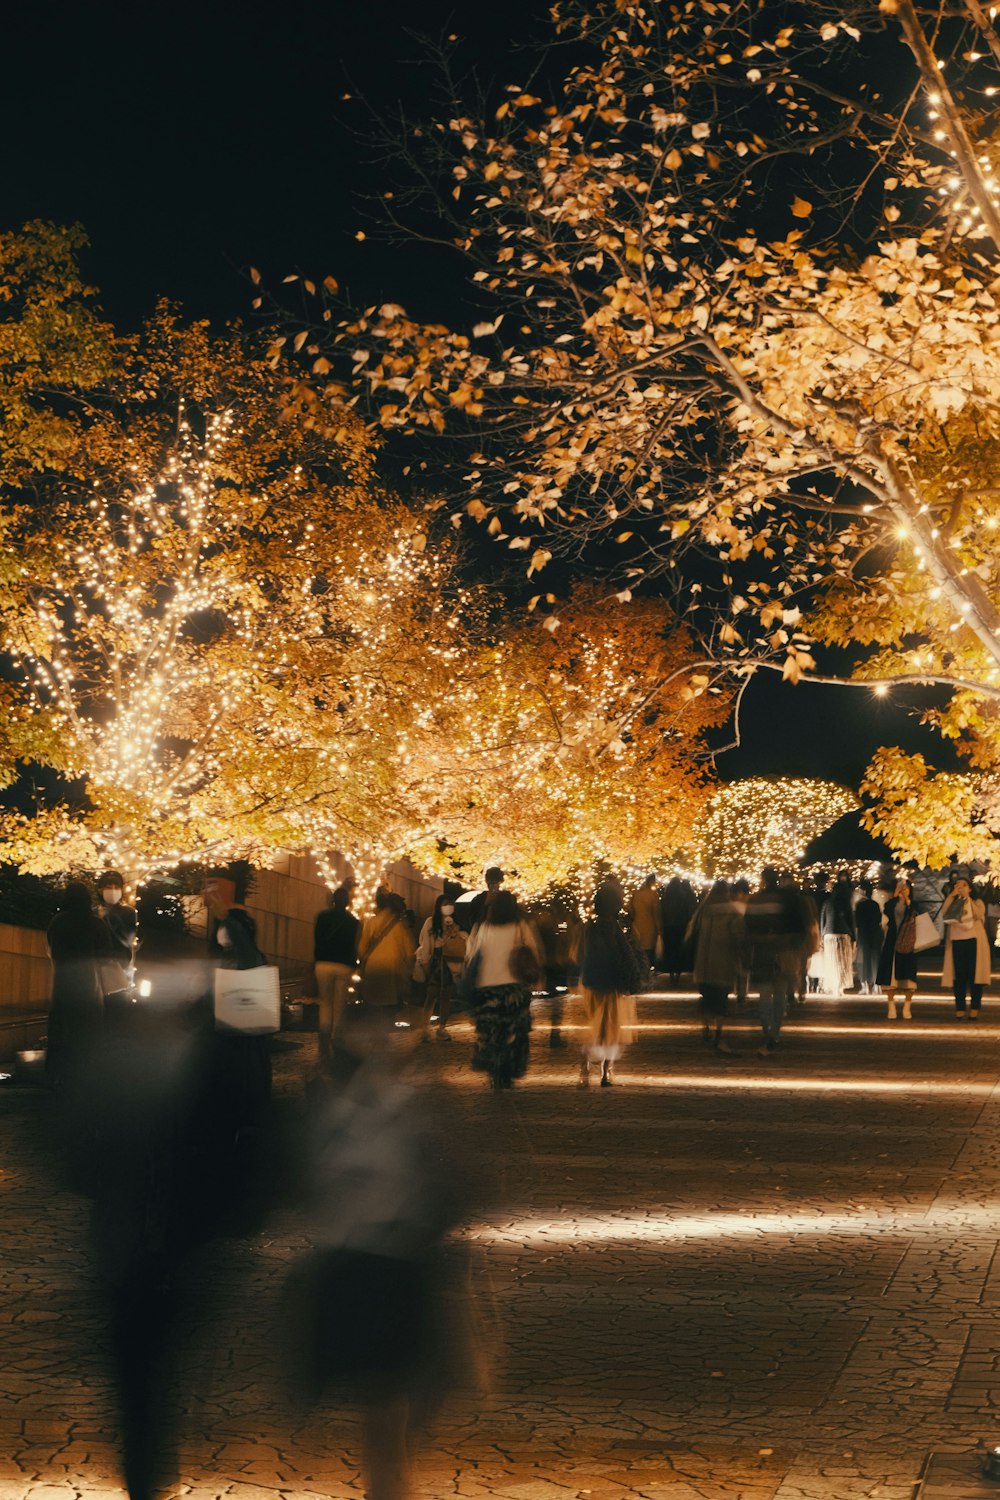 a group of people walking on a street with trees with lights